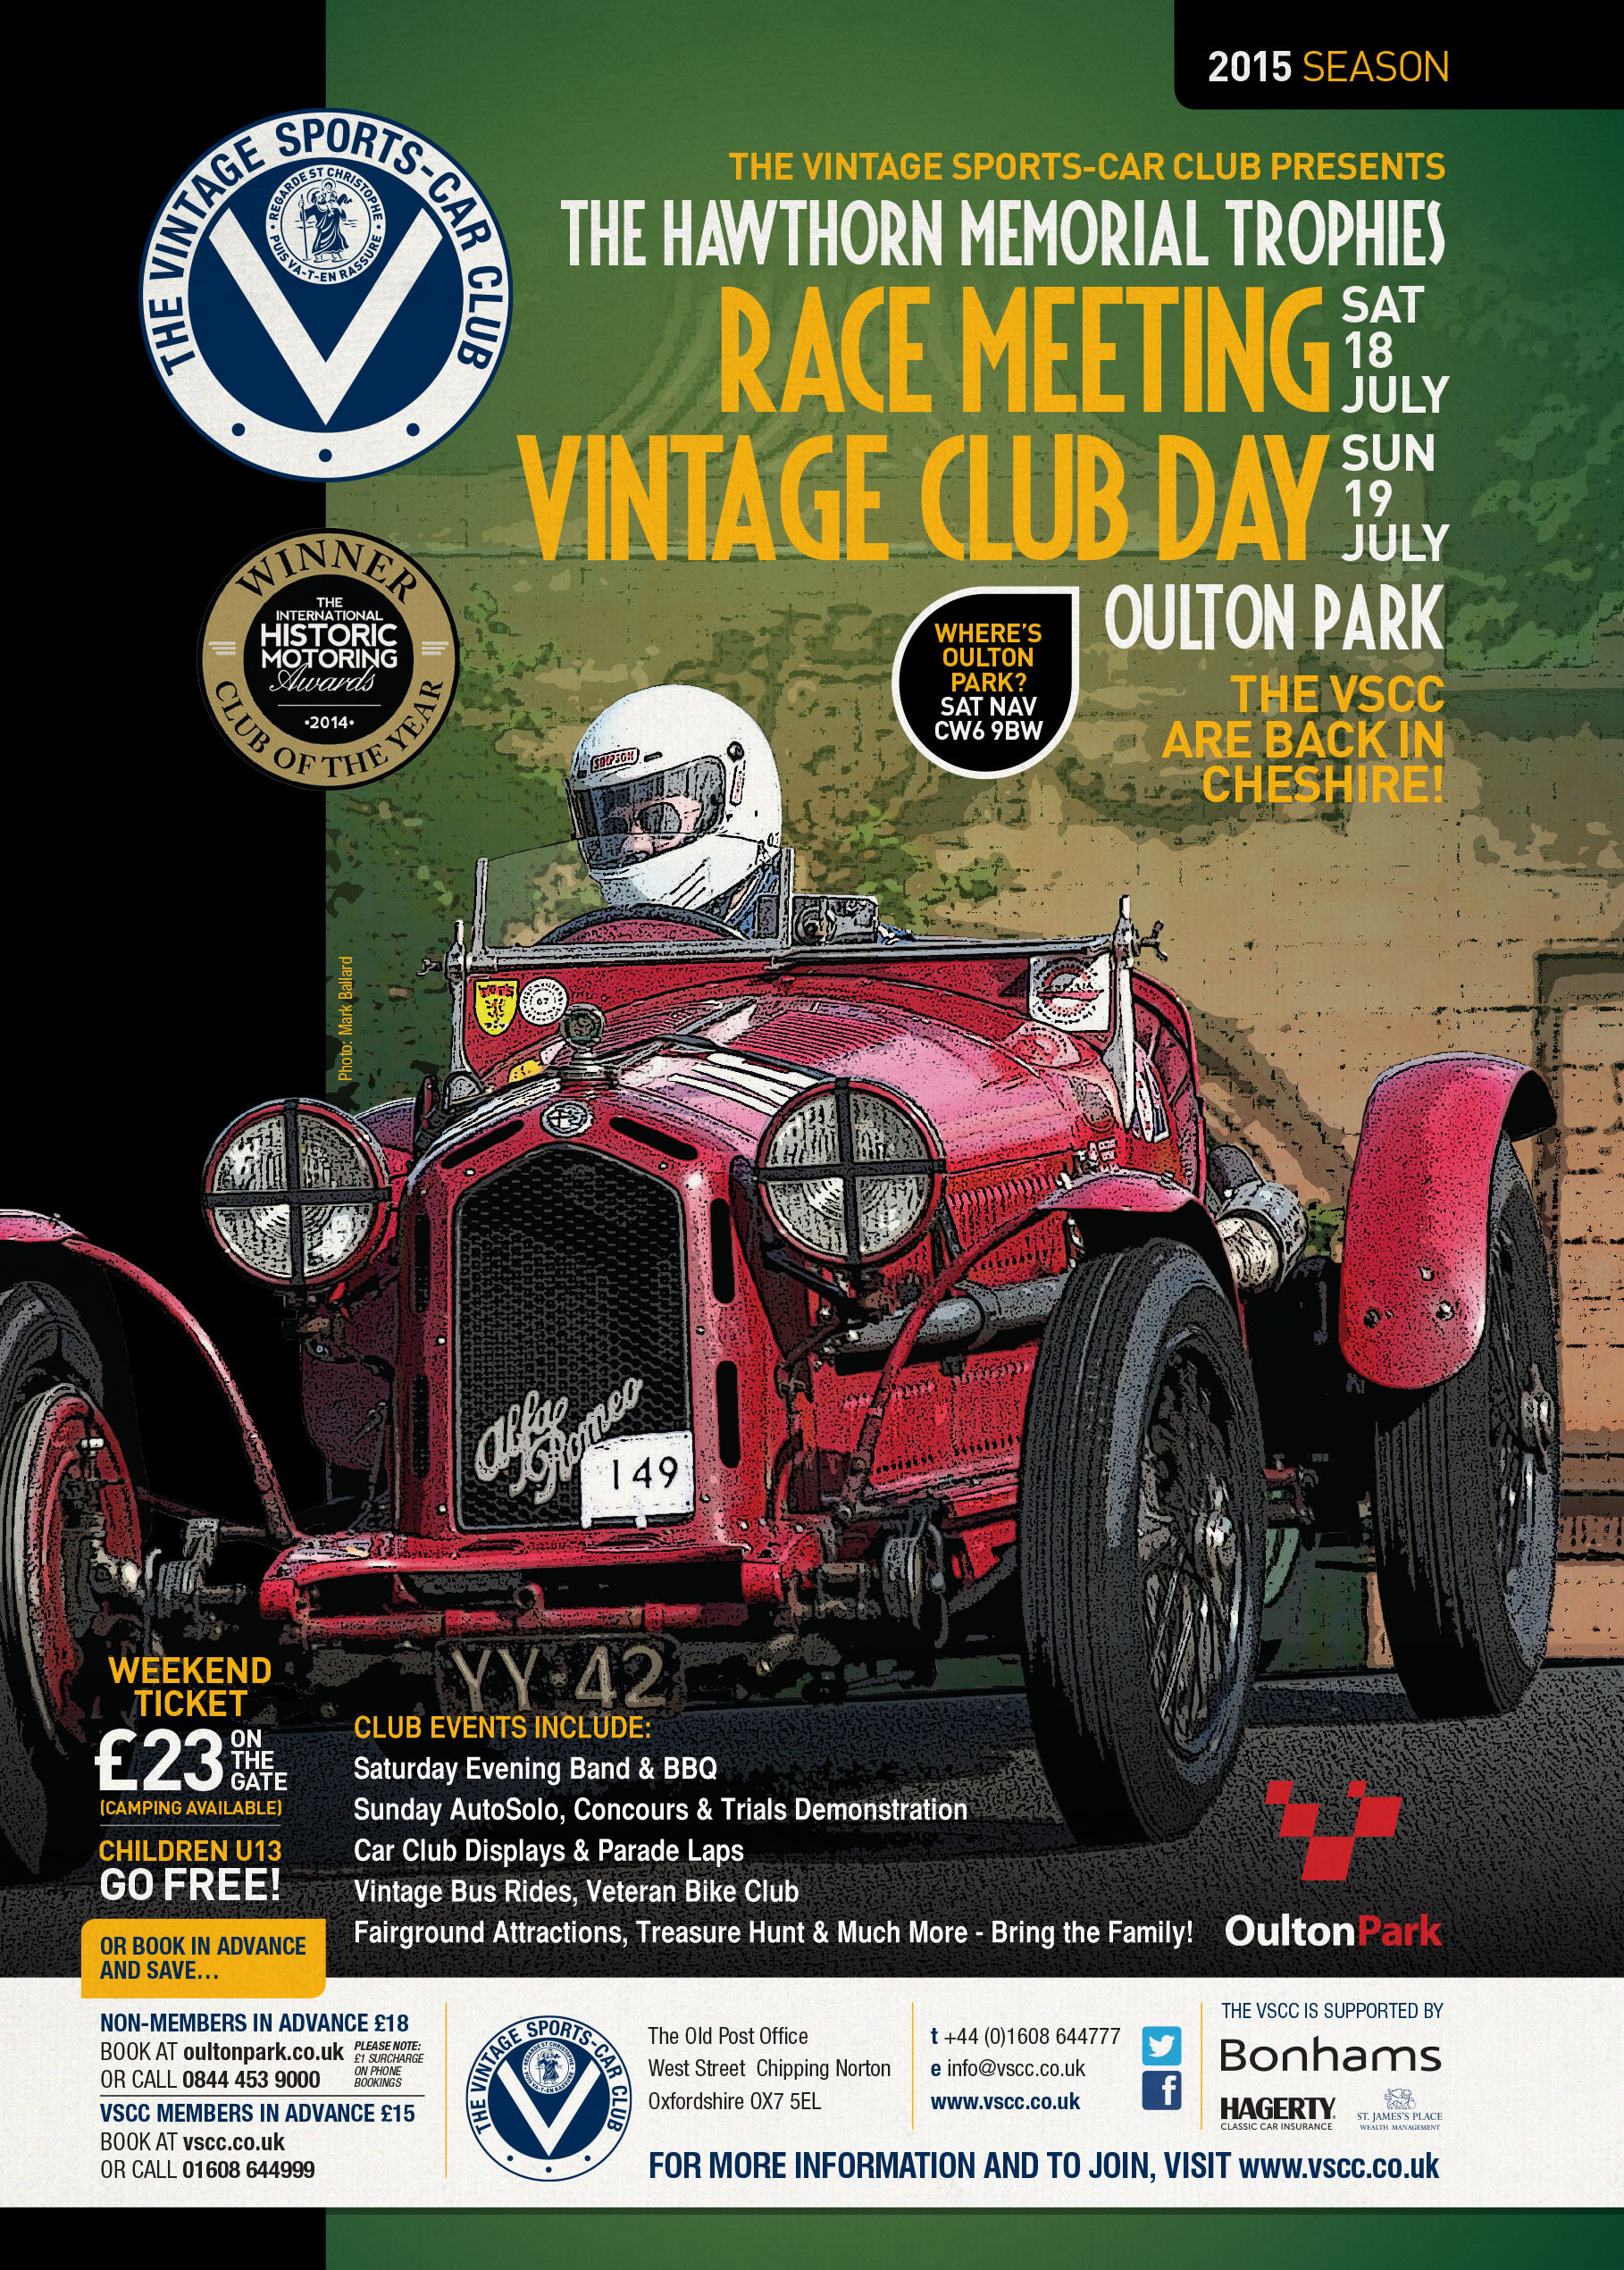 Entries Closing Soon for VSCC Oulton Park Race Meeting cover